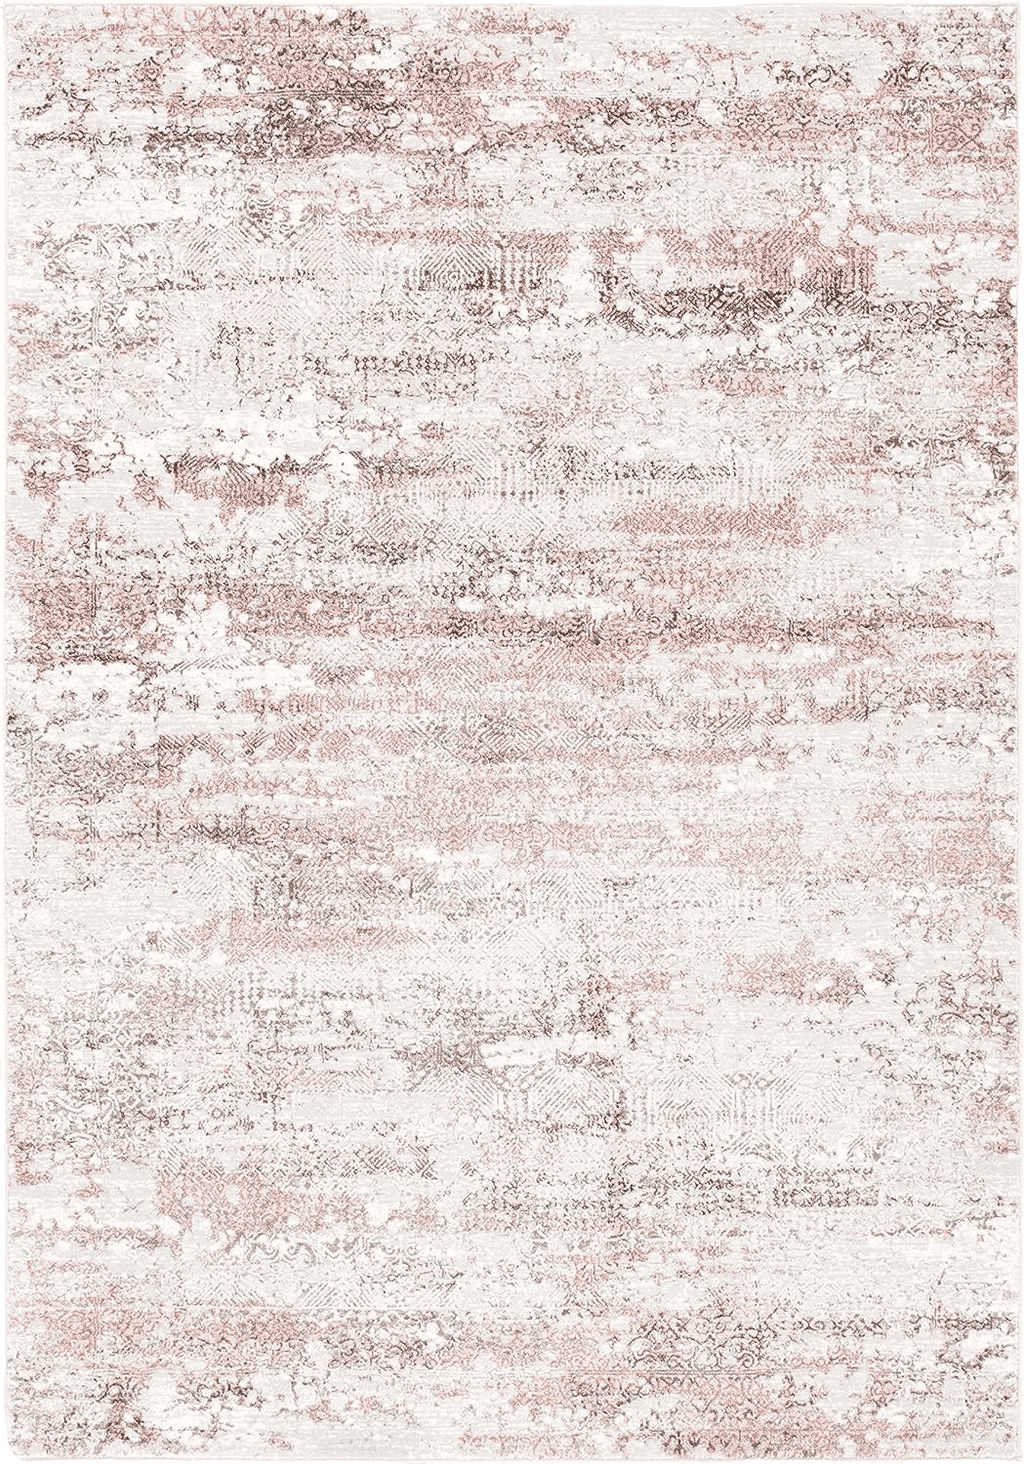 Area Pink SAFAVIEH Meadow Collection Area Rug - 9' x 12', Beige & Pink, Modern Abstract Design, Non-Shedding & Easy Care, Ideal for High Traffic Areas in Living Room, Bedroom (MDW585B)